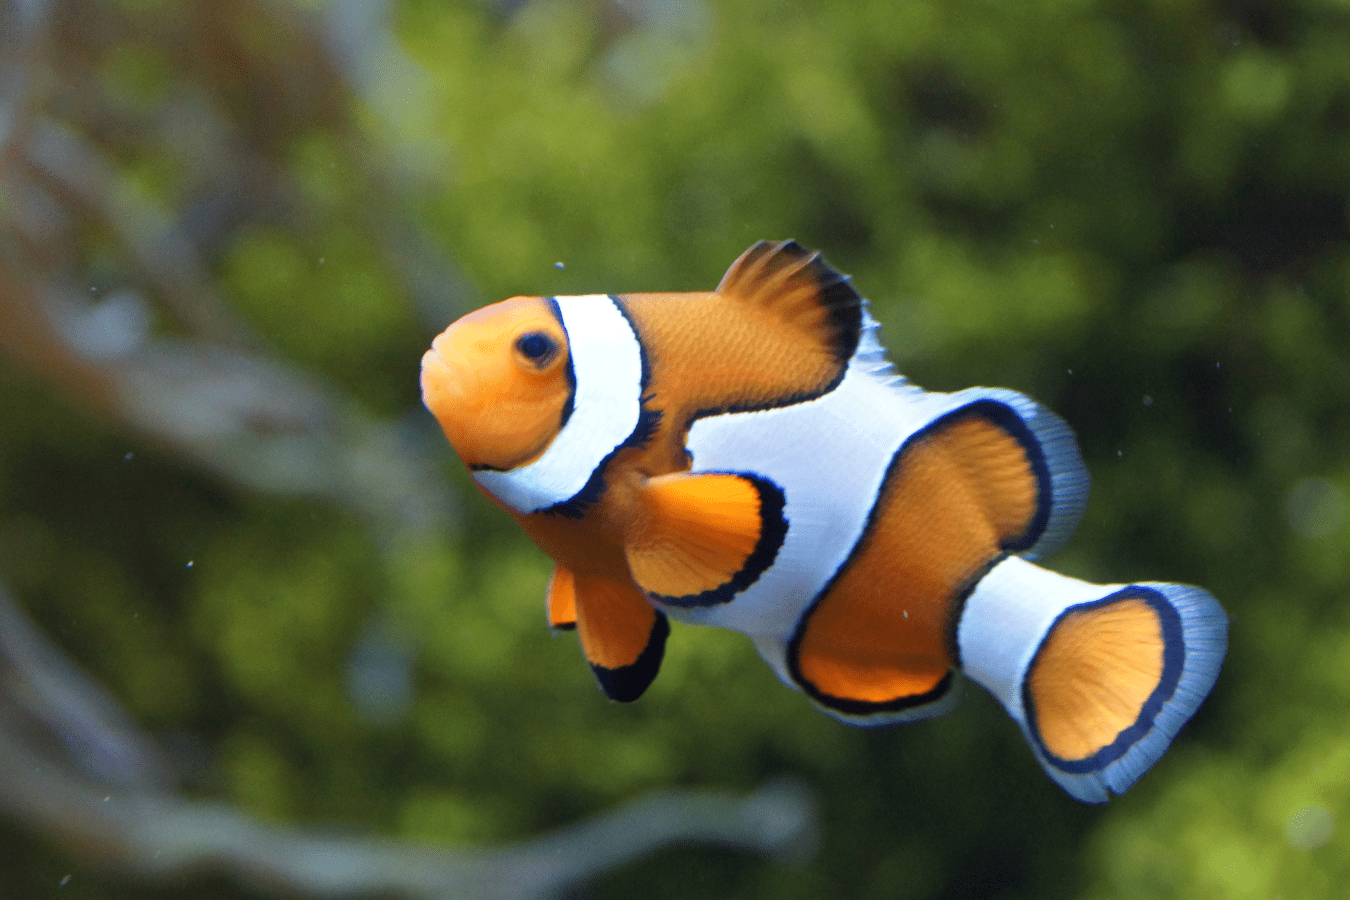 What Does It Mean When Dream About Fish?